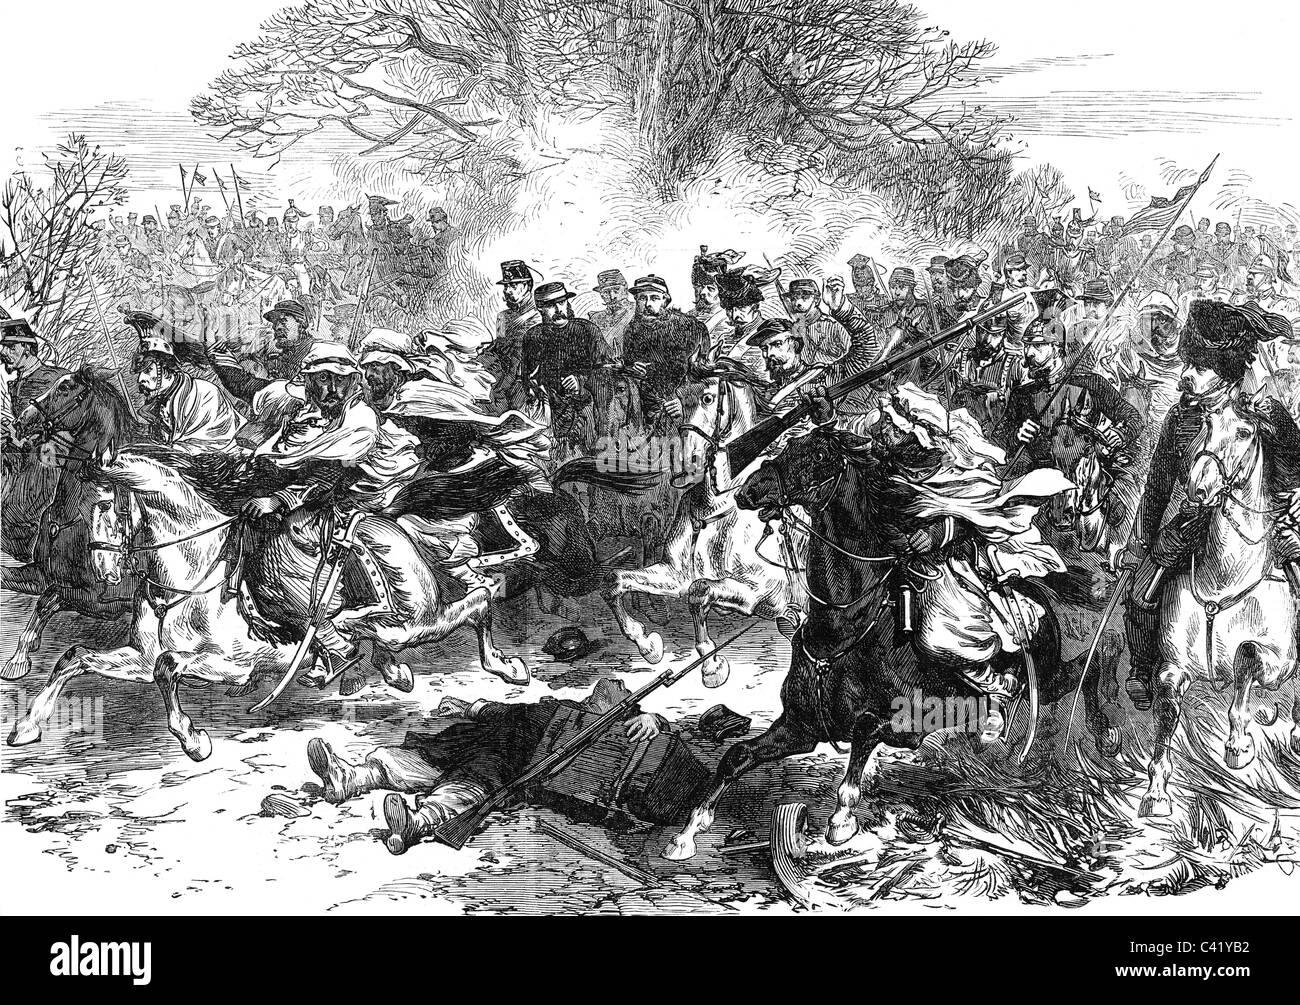 events, Franco-Prussian War 1870 - 1871, Second Battle of Orleans 3.- 4.12.1870, flight of the French cavalry, wood engraving, 1870, France, soldiers, North Africans, colonial troops, retreat, Franco Prussian, 19th century, historic, historical, people, Additional-Rights-Clearences-Not Available Stock Photo